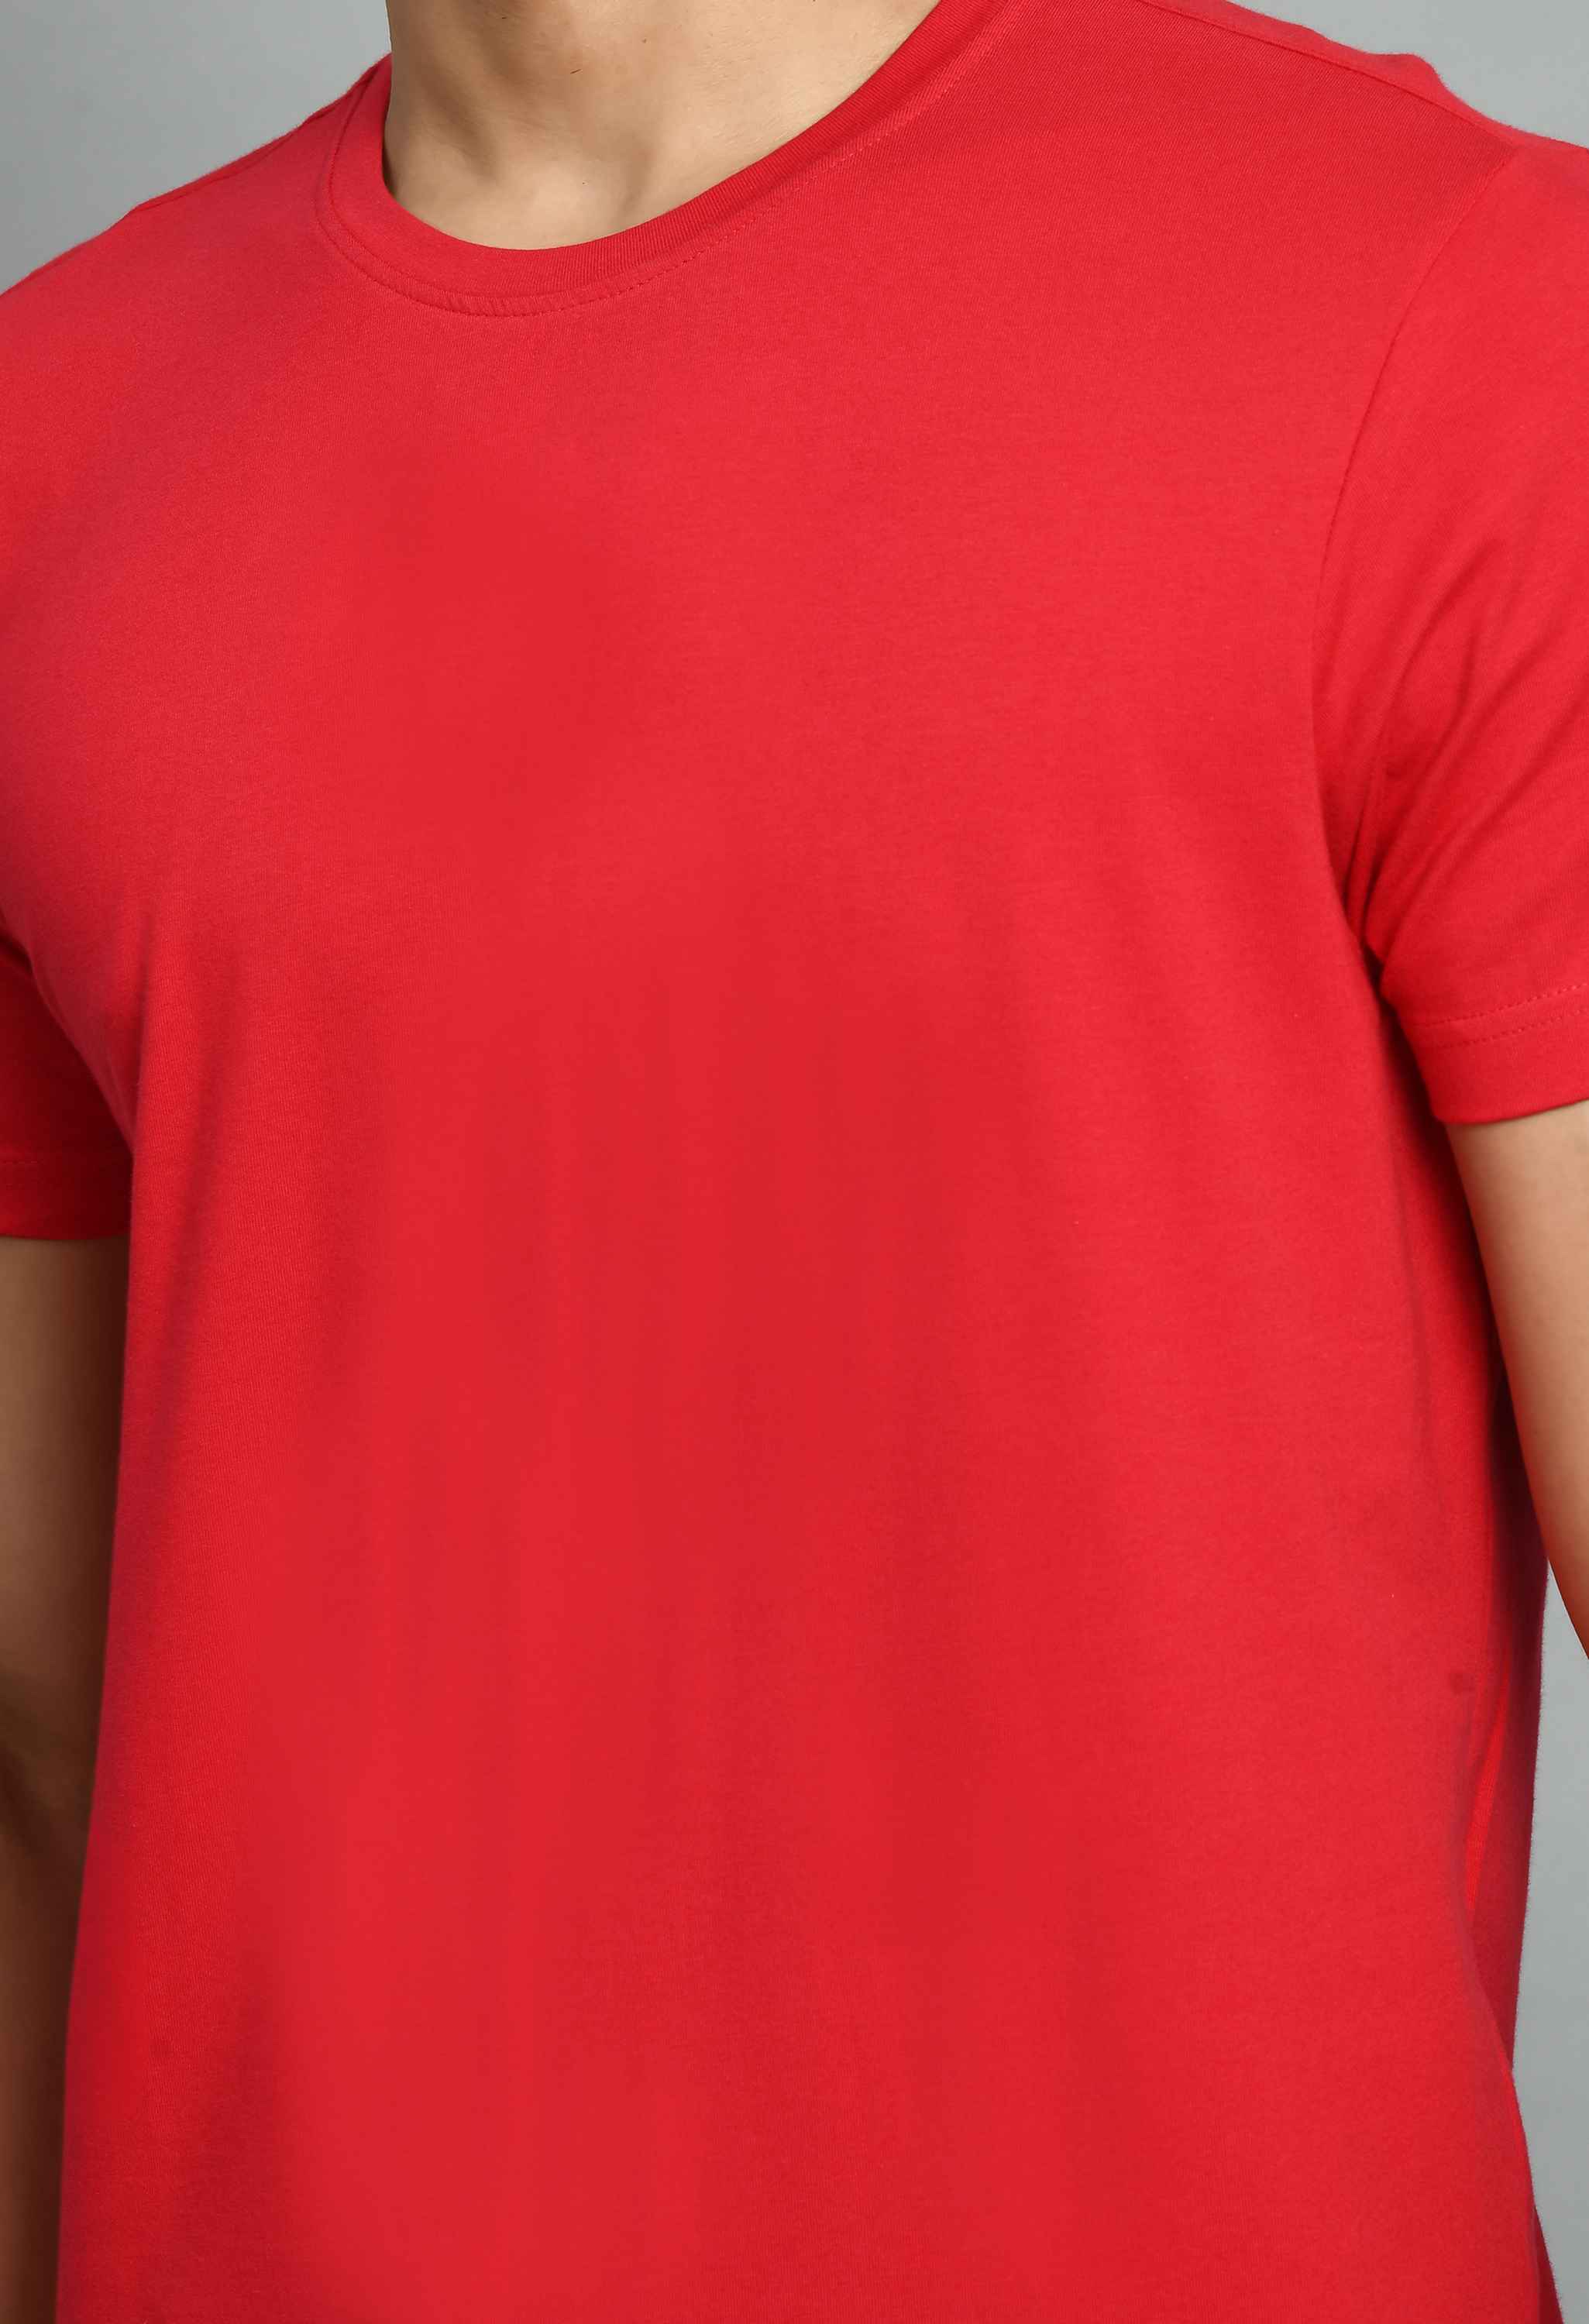 Solid Red Smart Fit T-Shirt